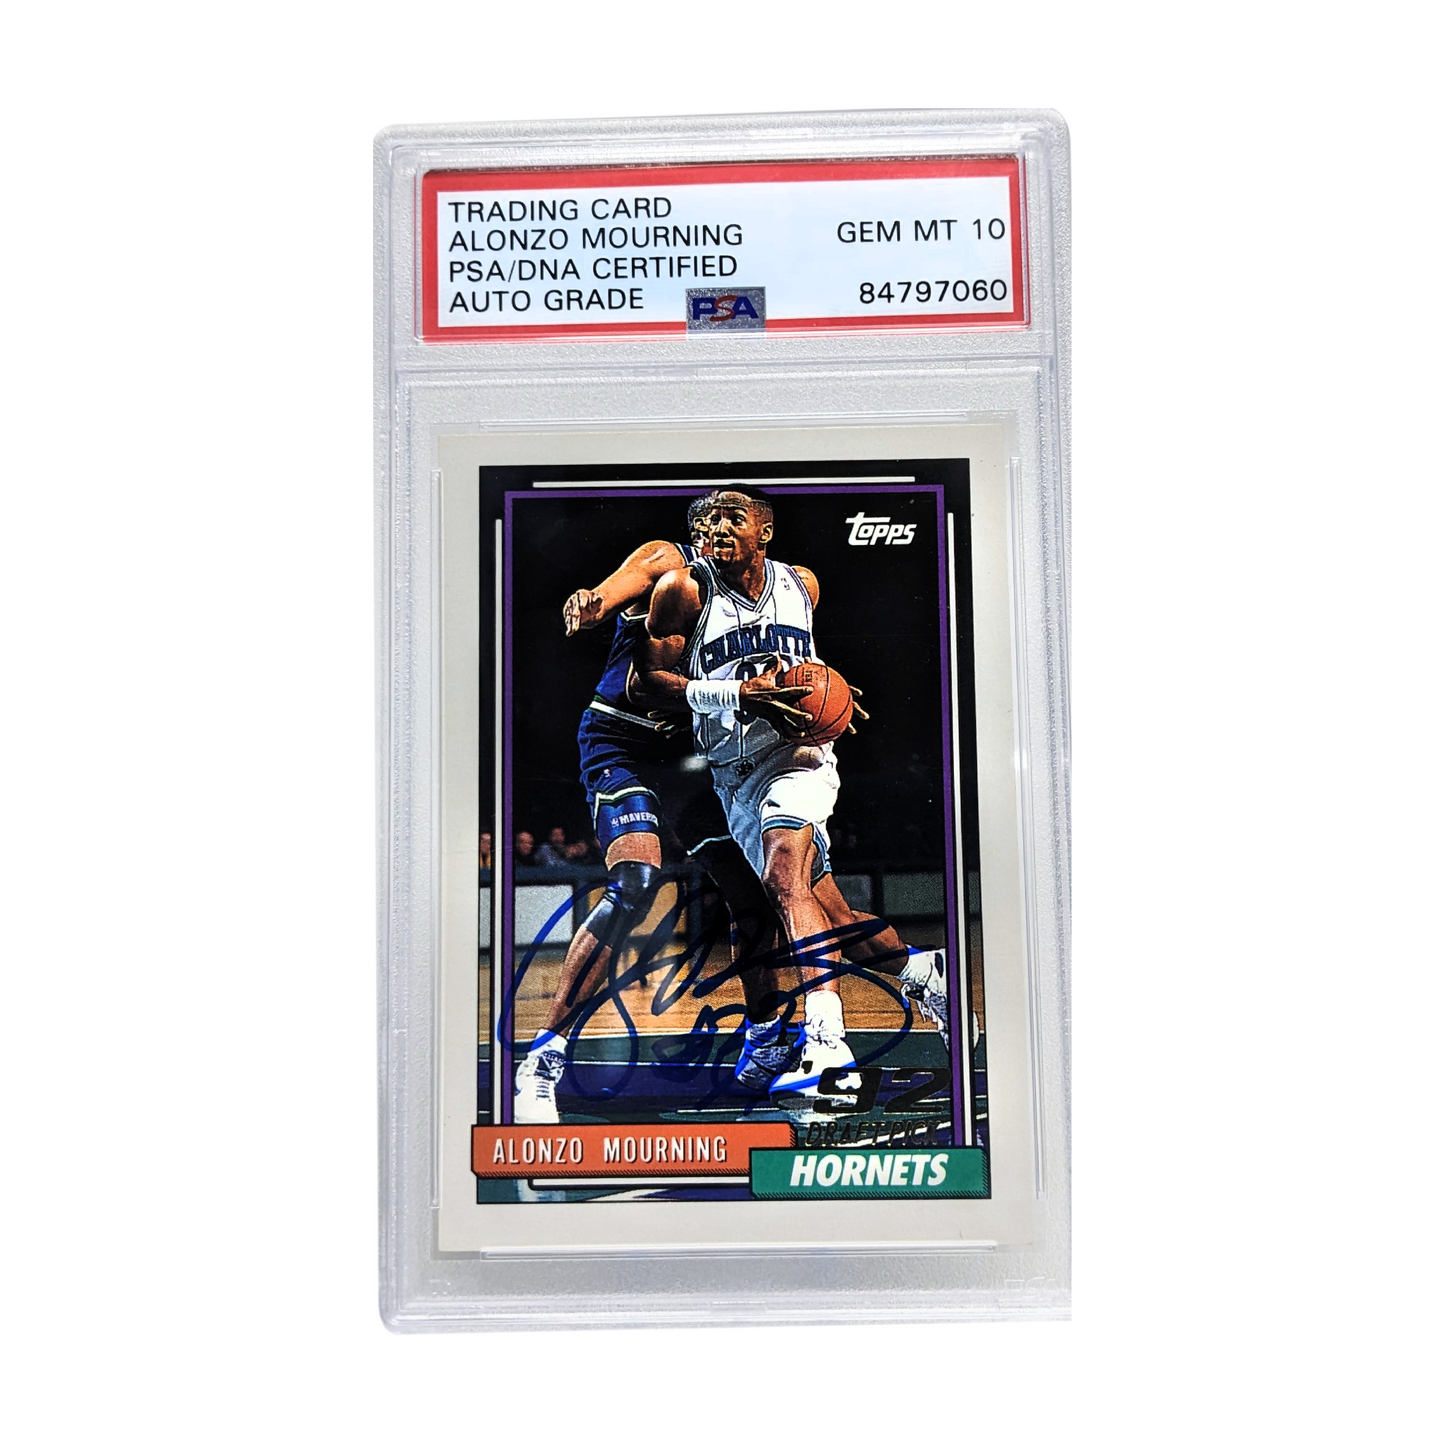 Alonzo Mourning 1992-93 Topps Autographed Card PSA Gem Mint 10 Auto